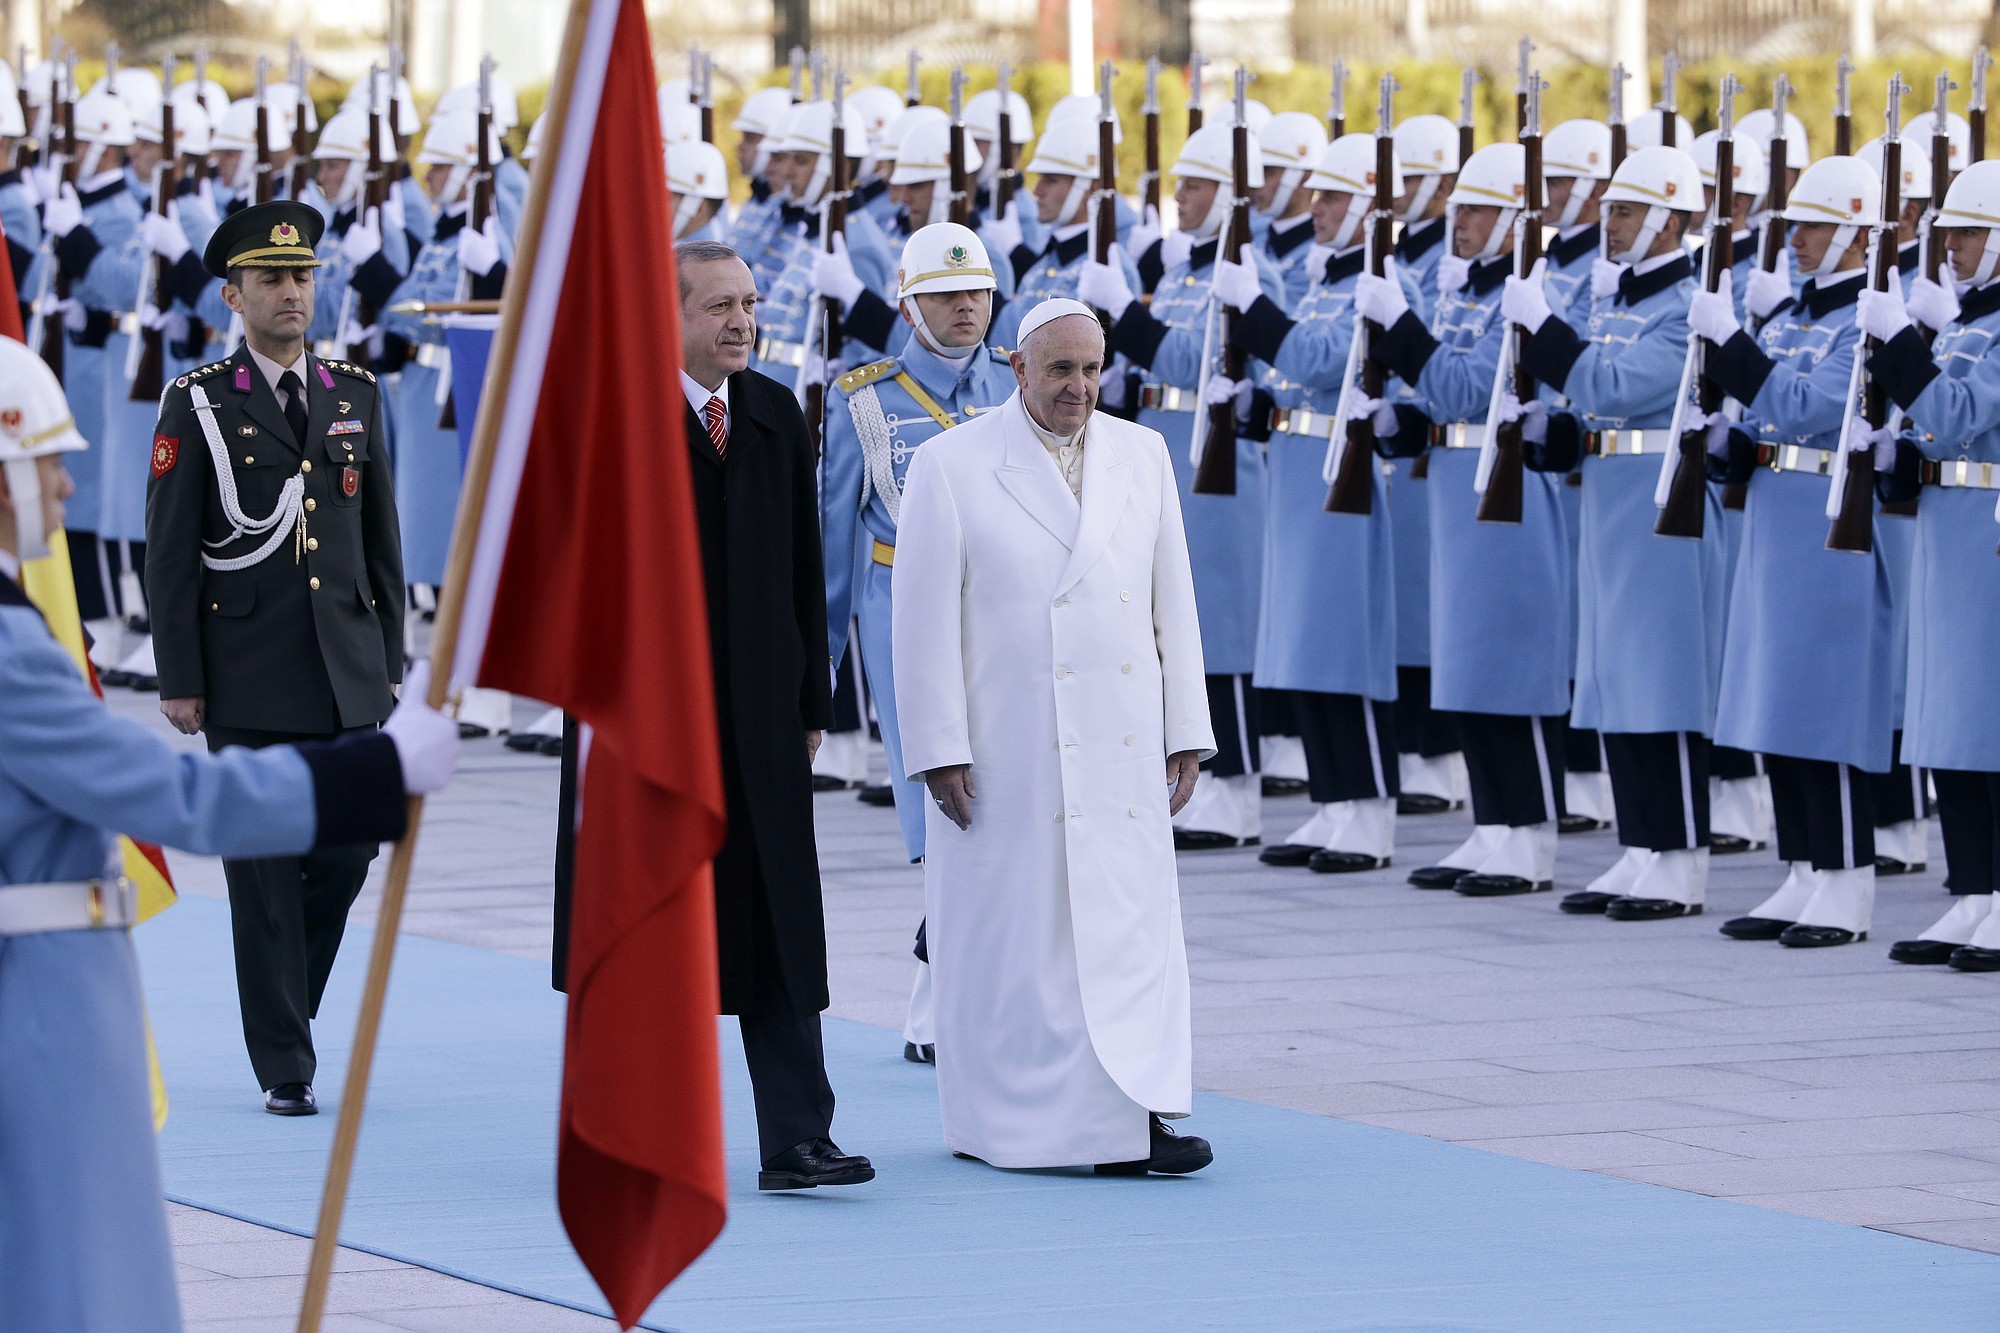 Pope Francis is welcomed by Turkish President Recep Tayyip Erdogan on Friday at the presidential palace in Ankara.